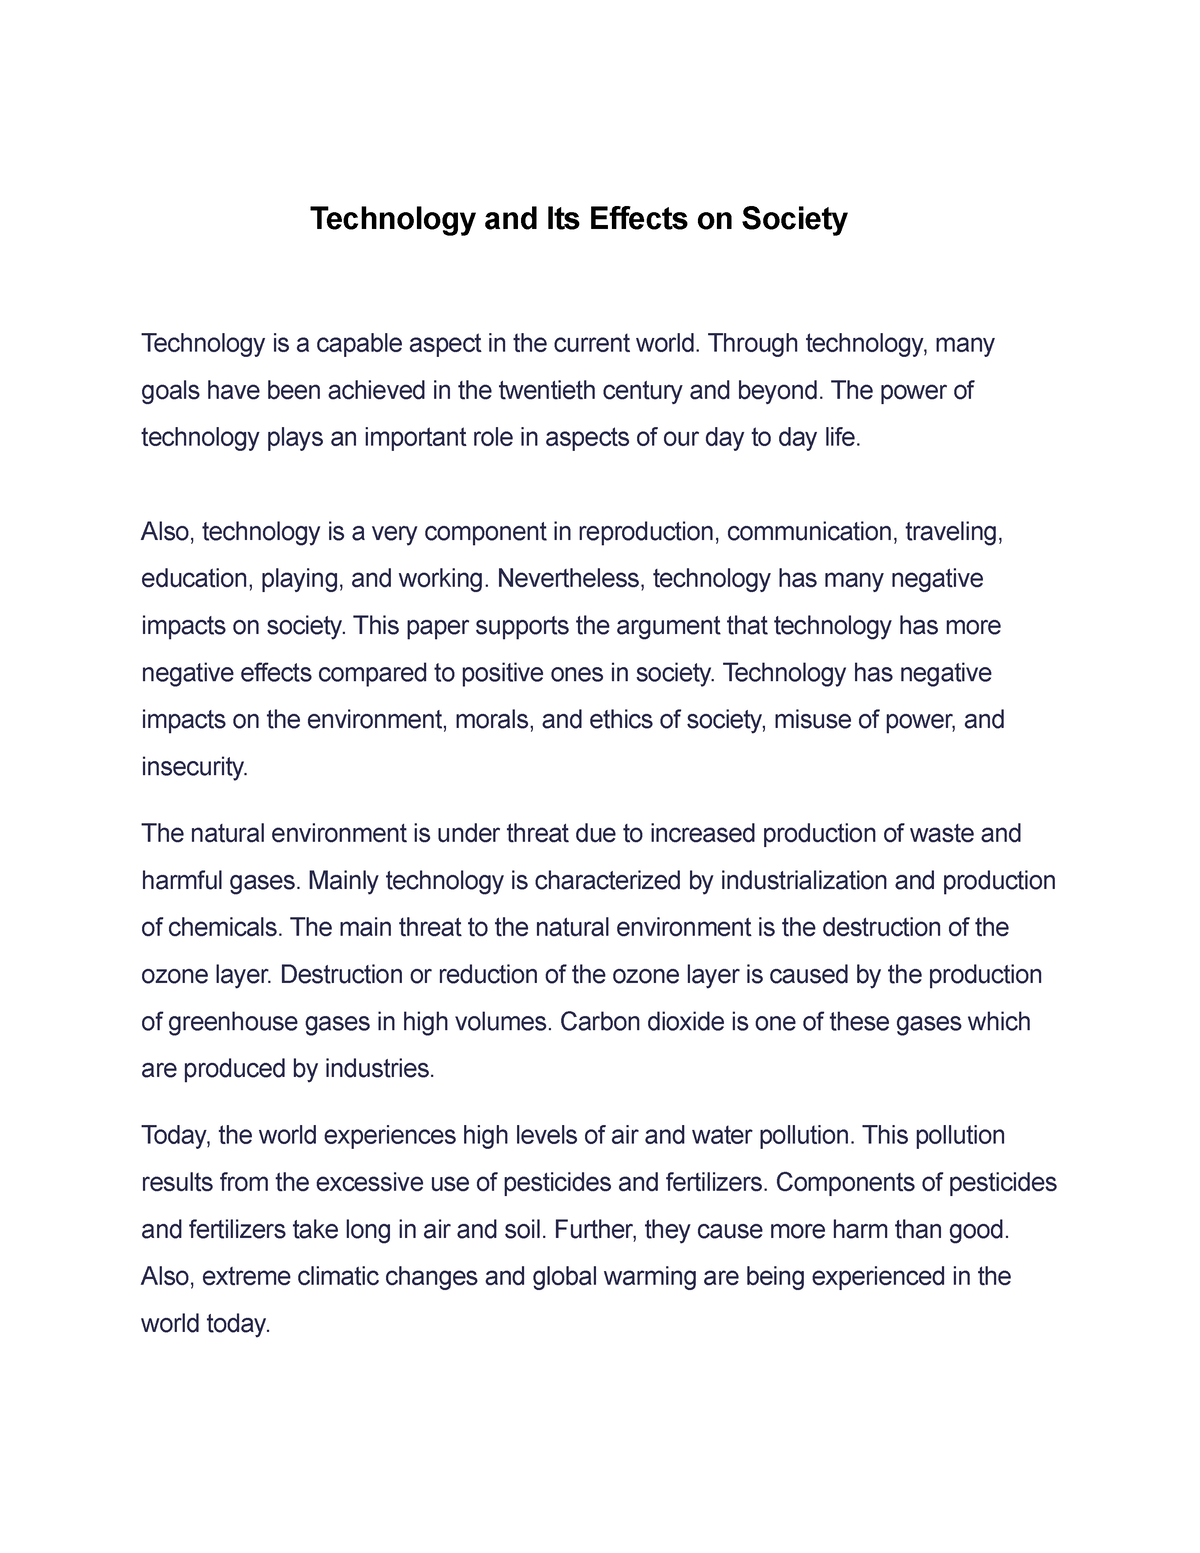 essay about technology effects